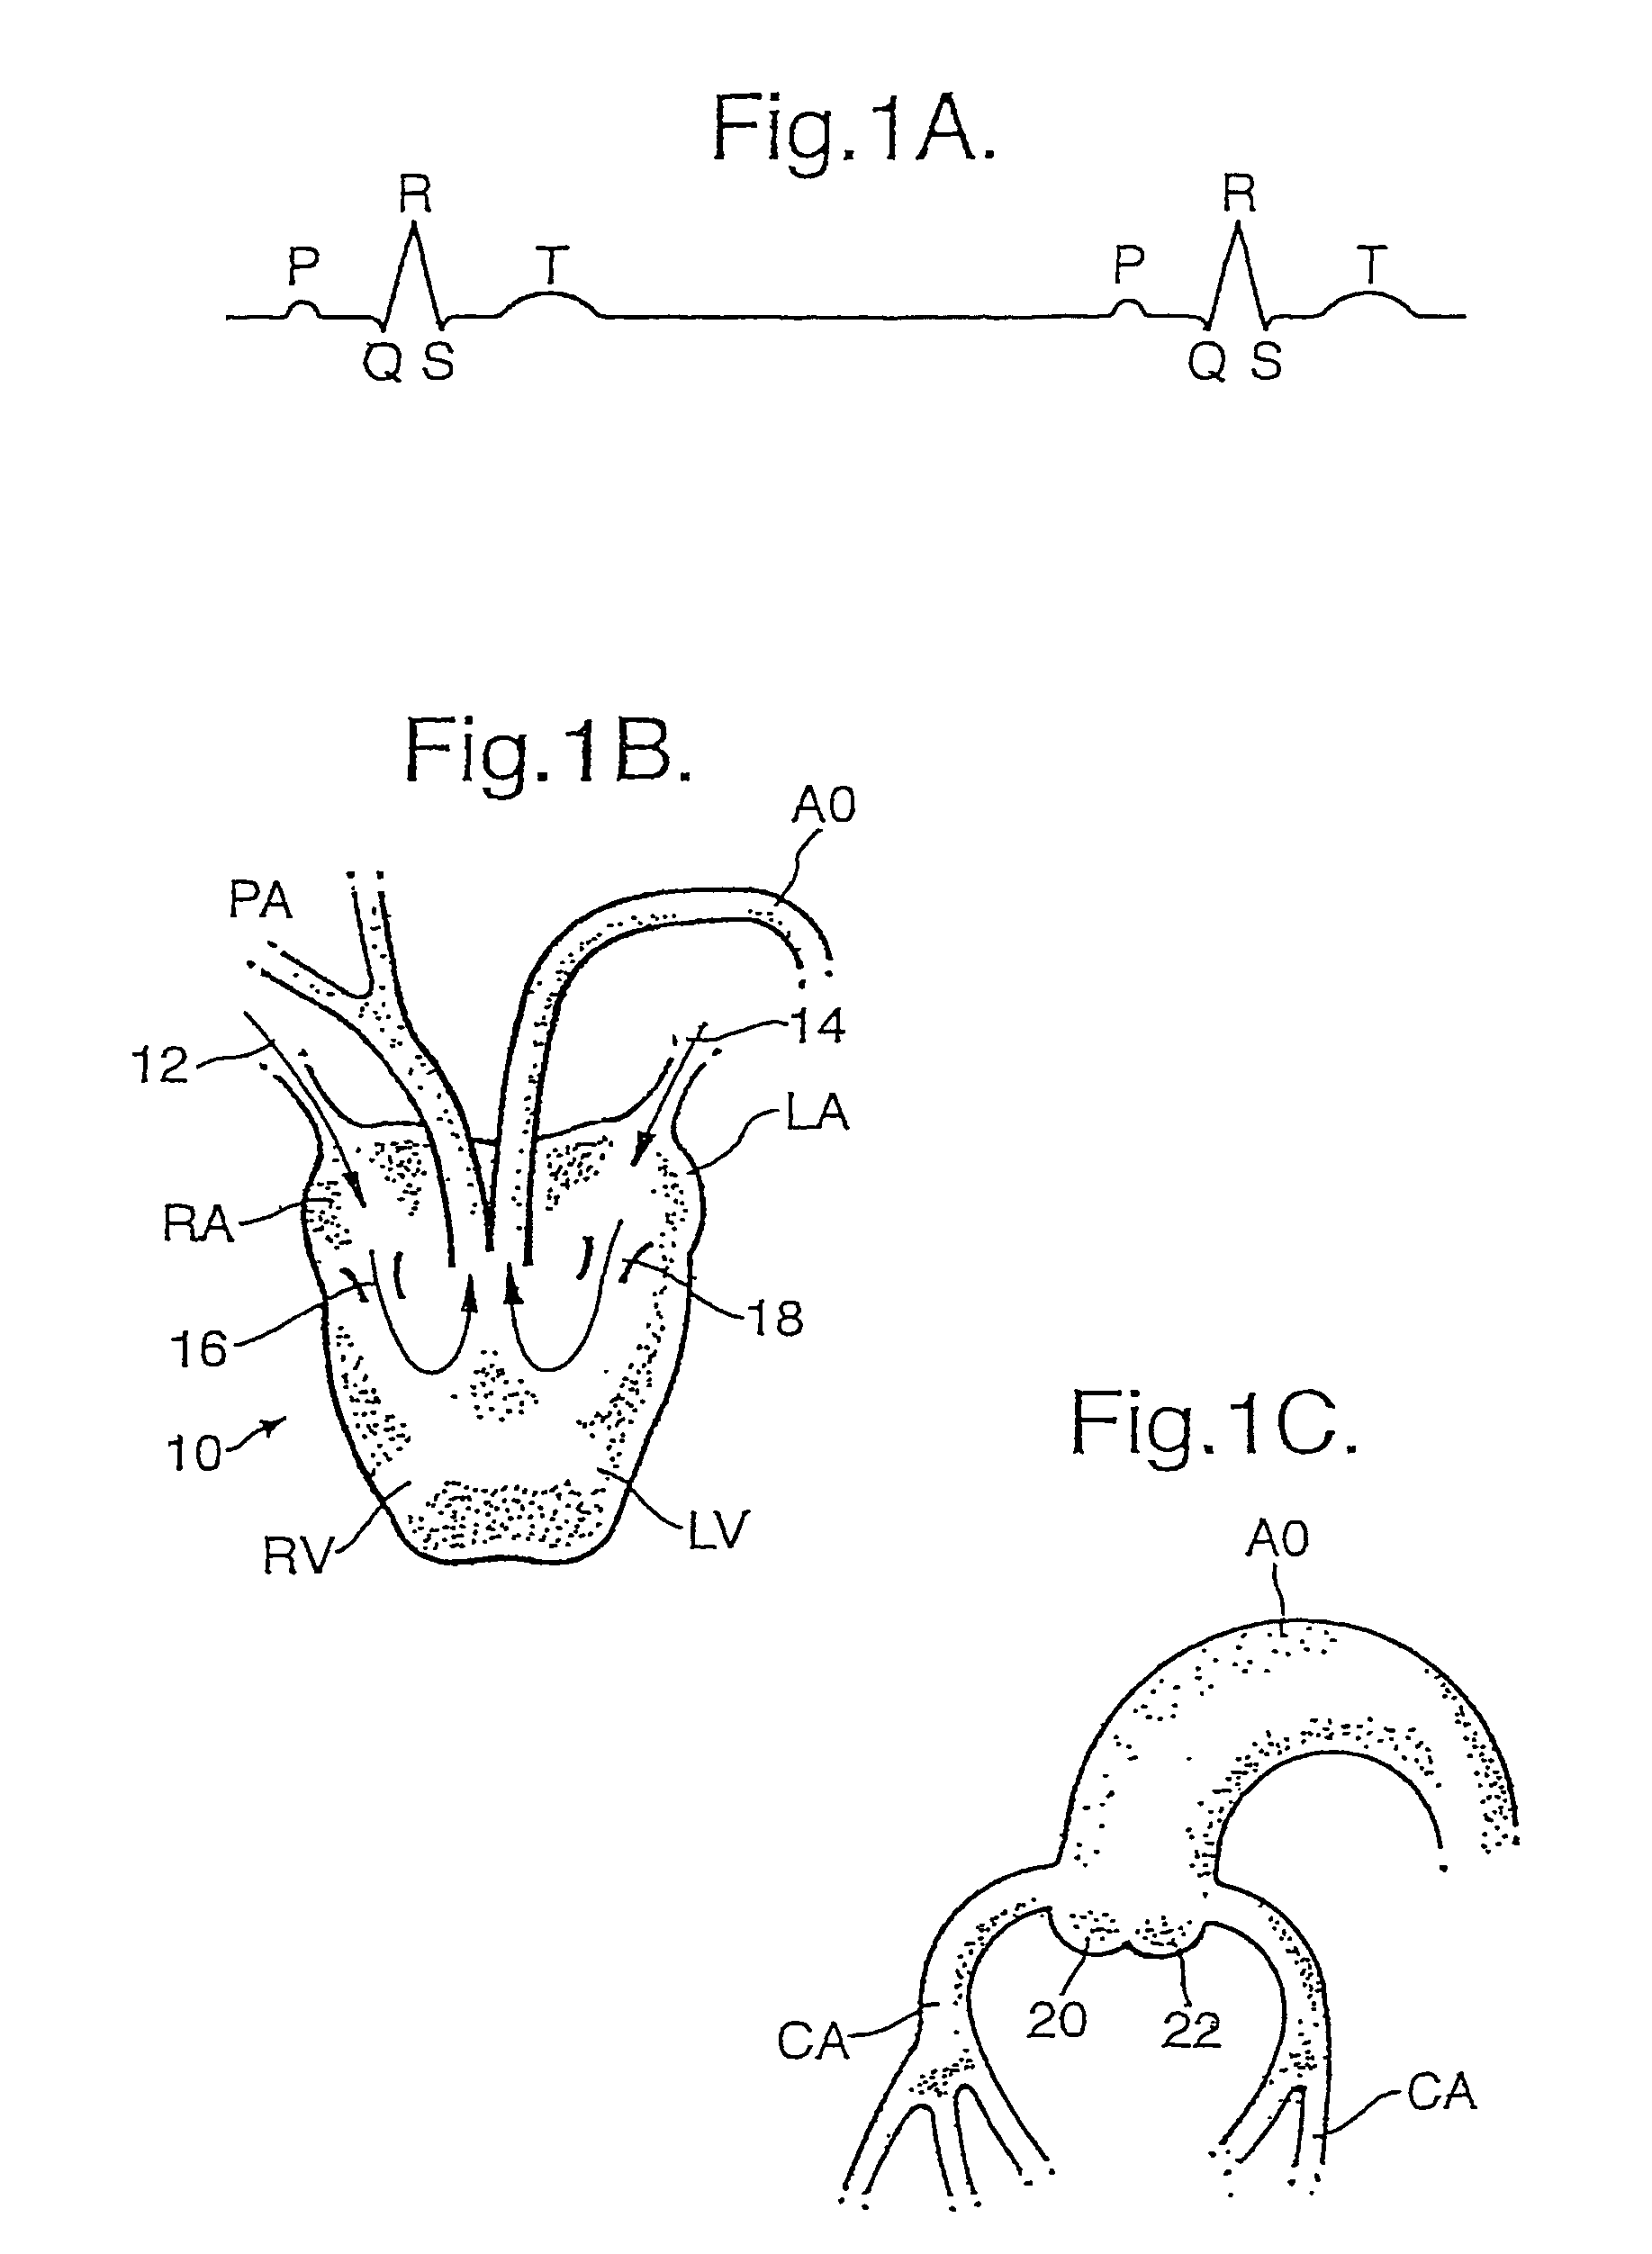 Electrotherapy apparatus and method of treating a person or a mammal using such electrotherapy apparatus